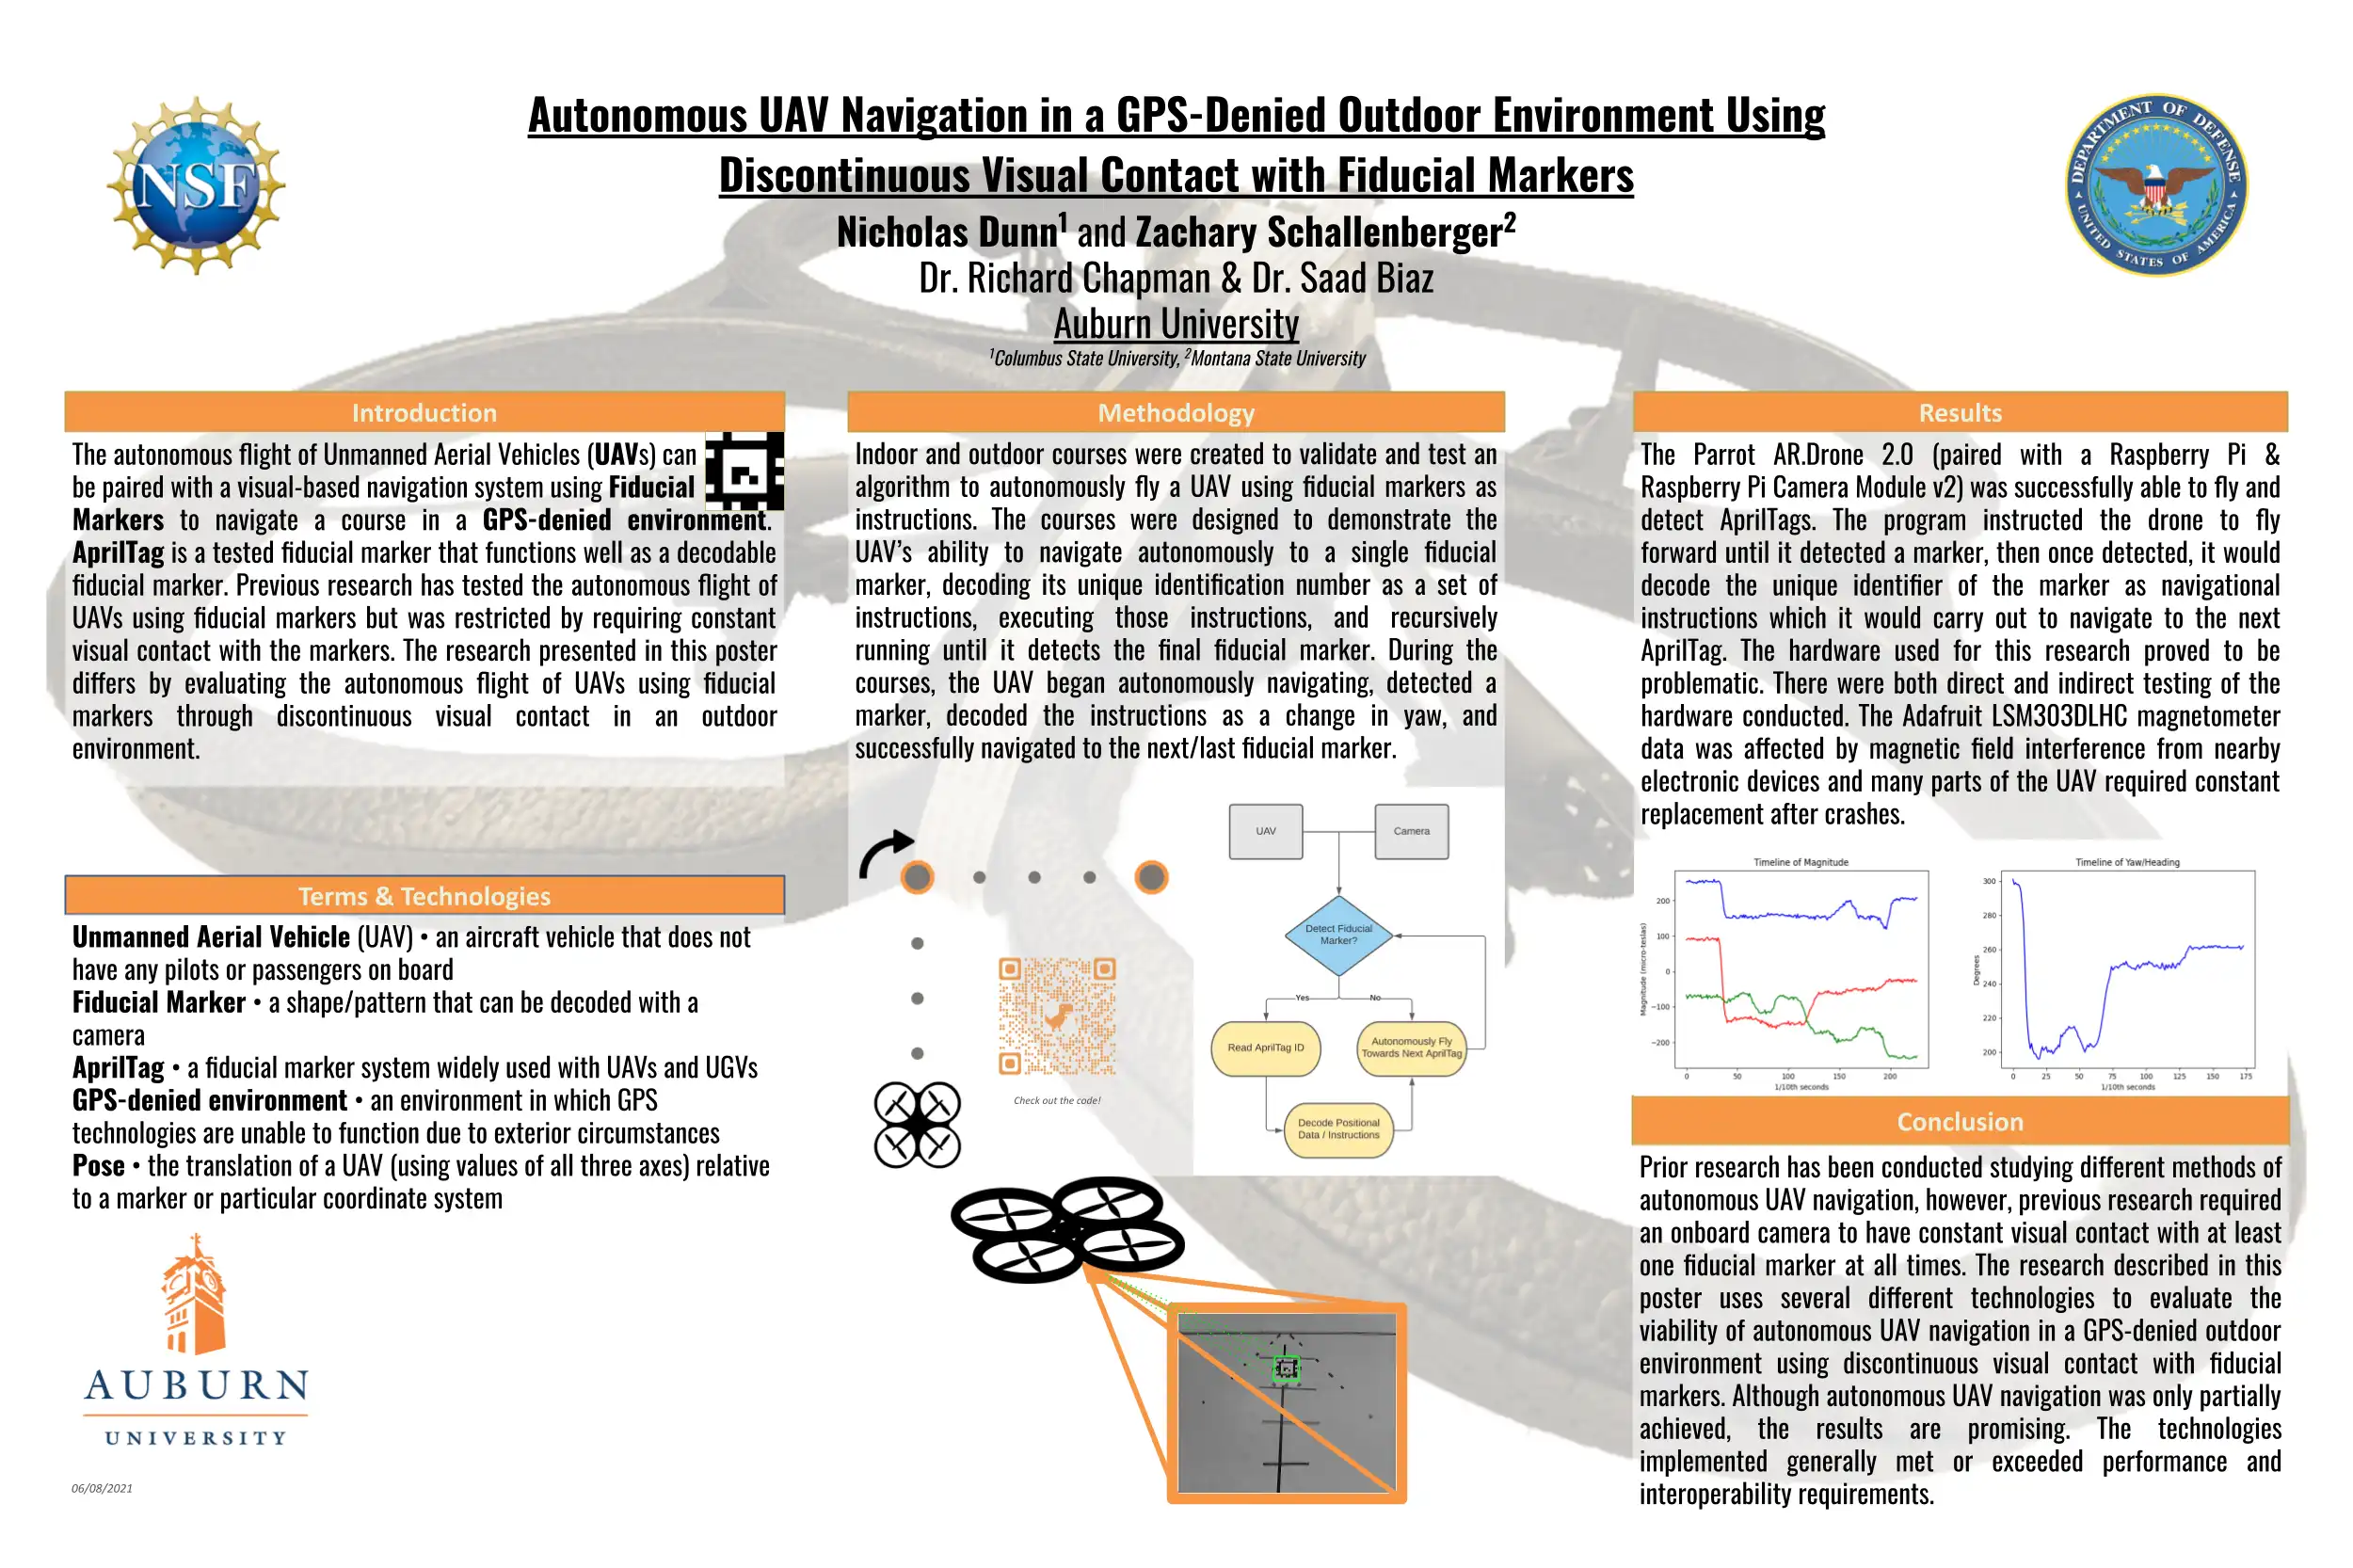 Autonomous UAV Navigation in a GPS-Denied Outdoor Environment Usign Discontinuous Visual Contact With Fiducial Markers technical poster